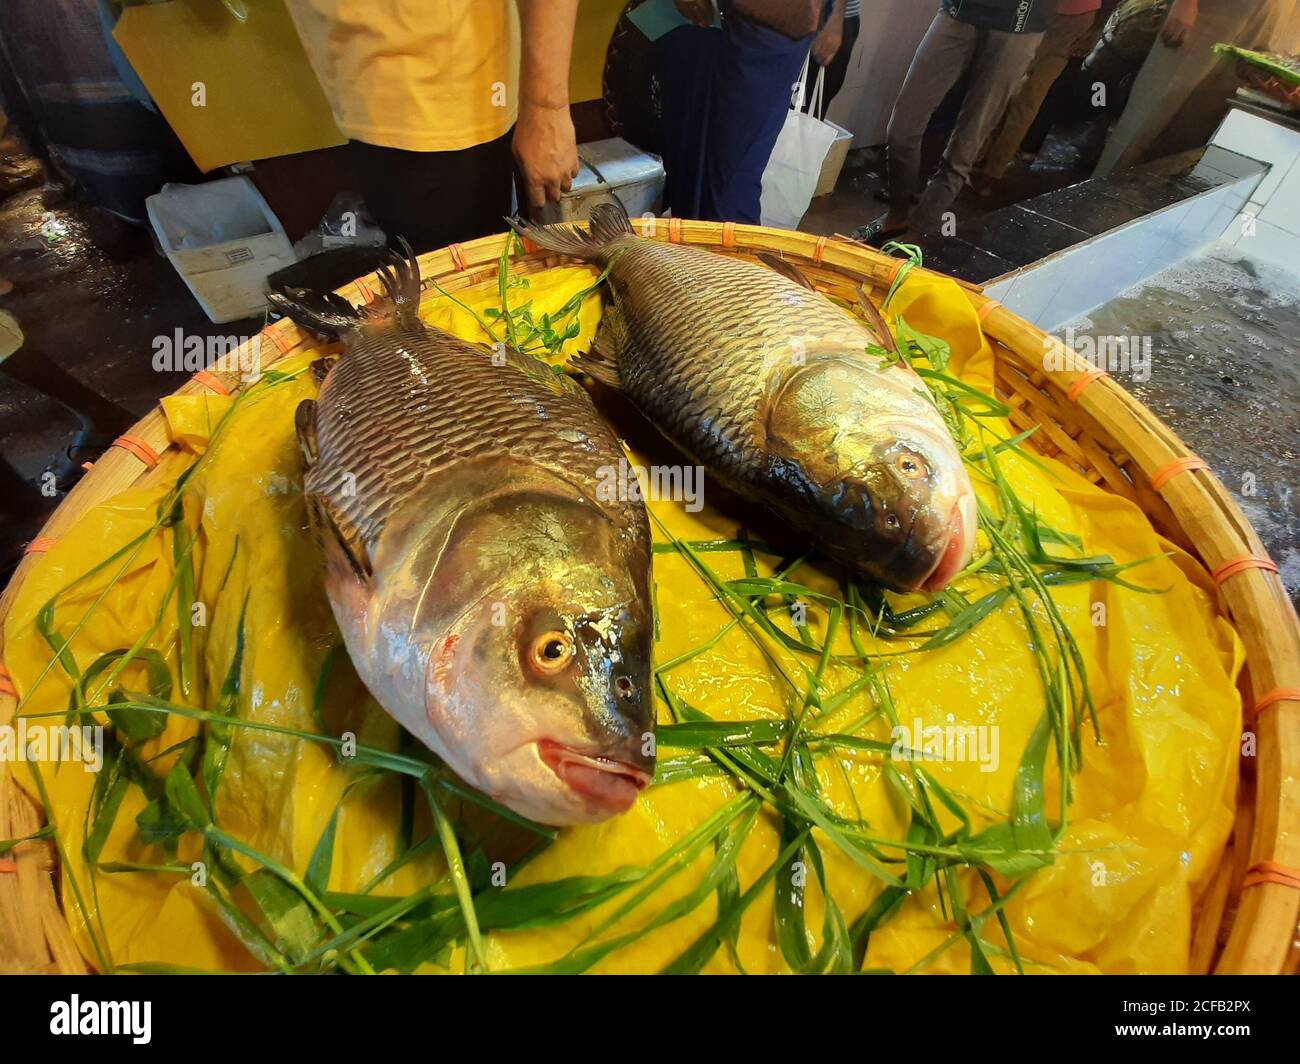 Fish is the main source of animal protein for Bangladeshi people.  Fish sellers are selling fish catch from fresh and brackish water. Stock Photo